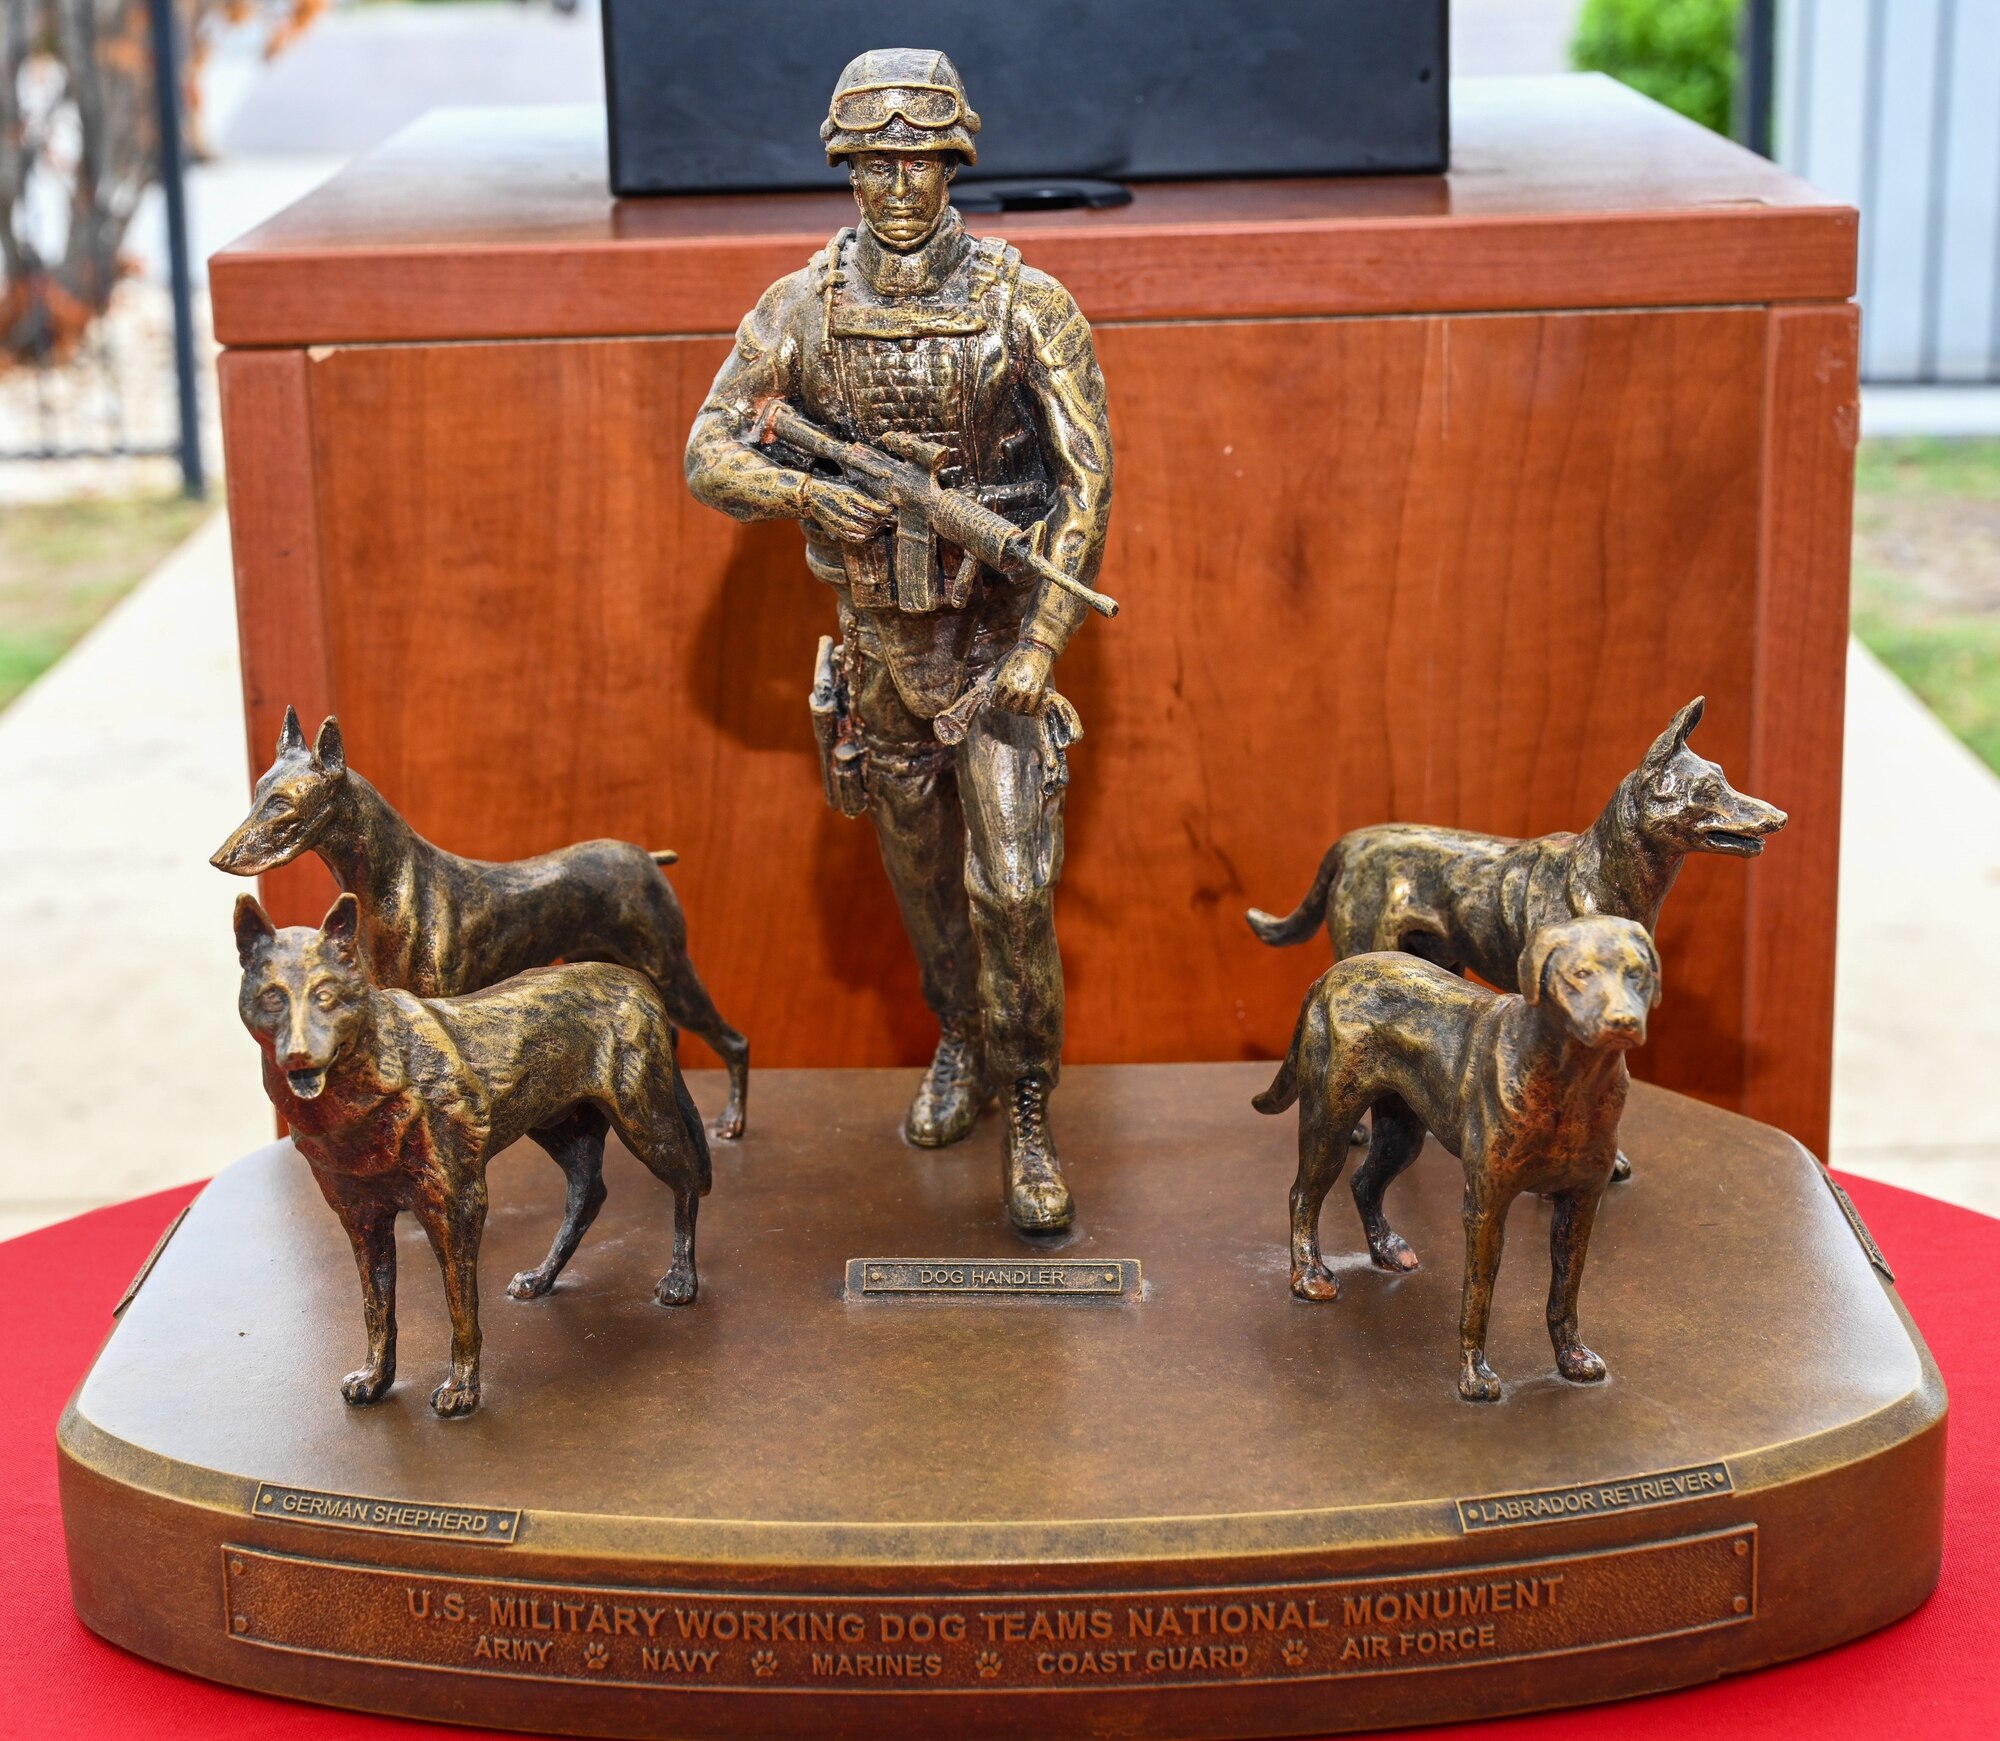 U.S. Military Working Dog Teams observe 10th anniversary of monument